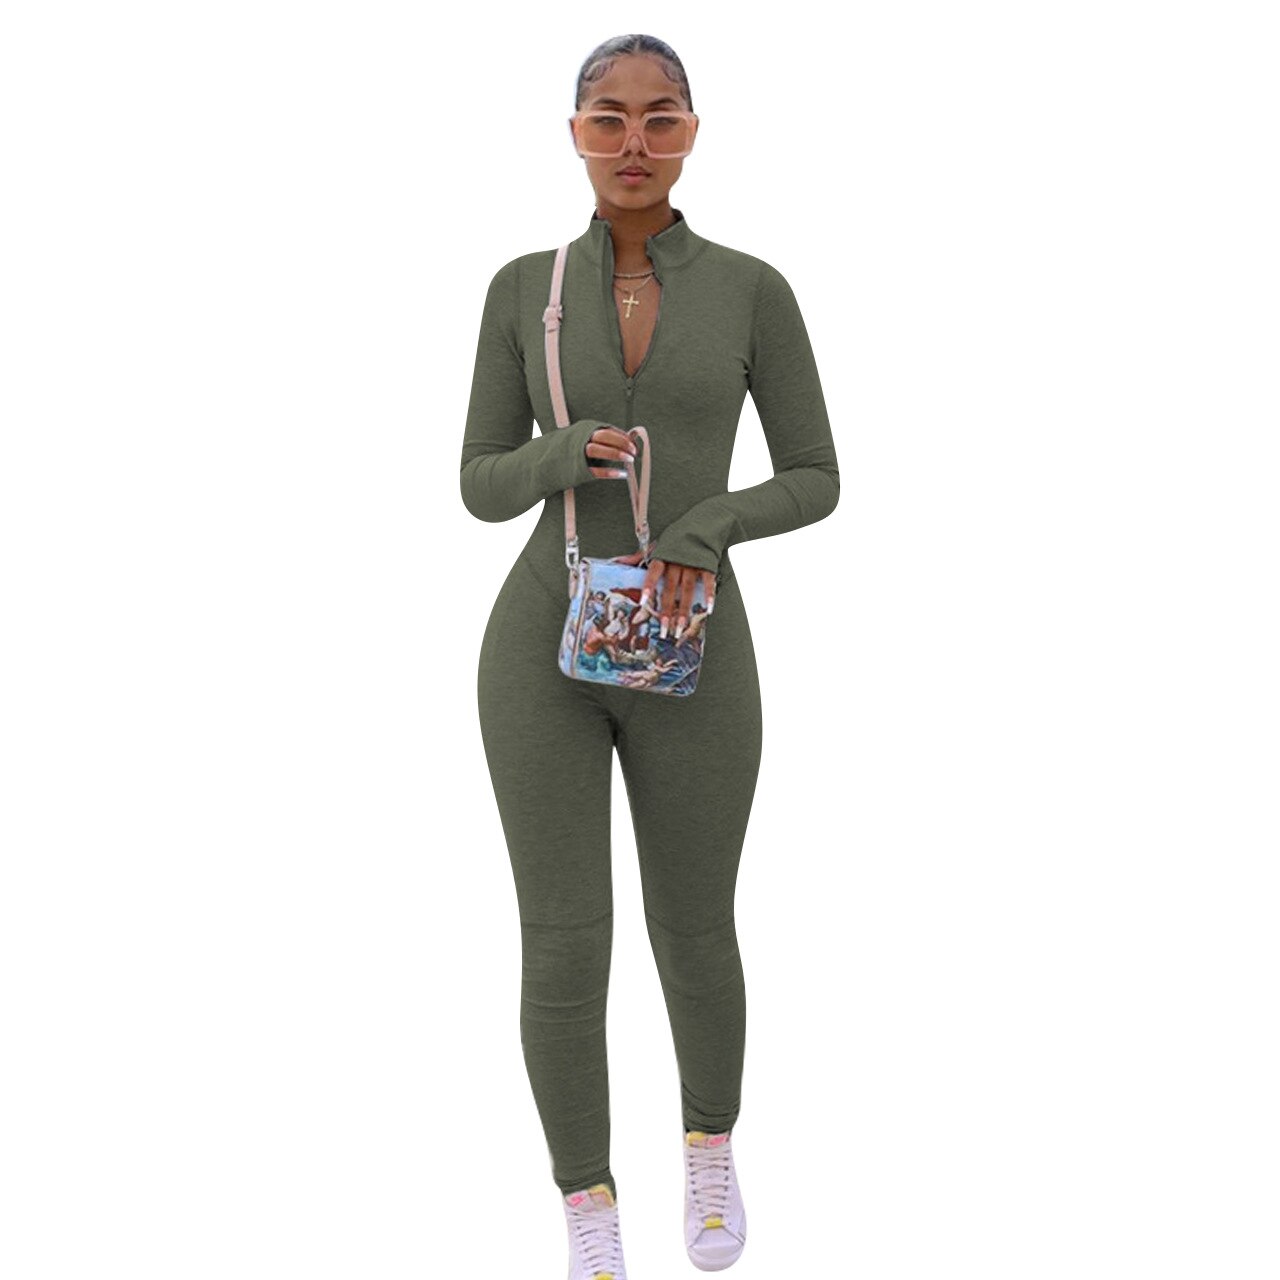 Echoine Zipper Long Sleeve Jumpsuit Green Gray Skinny Bodycon Sexy Rompers Autumn Rompers Party Clubwear Outfits Overalls Women